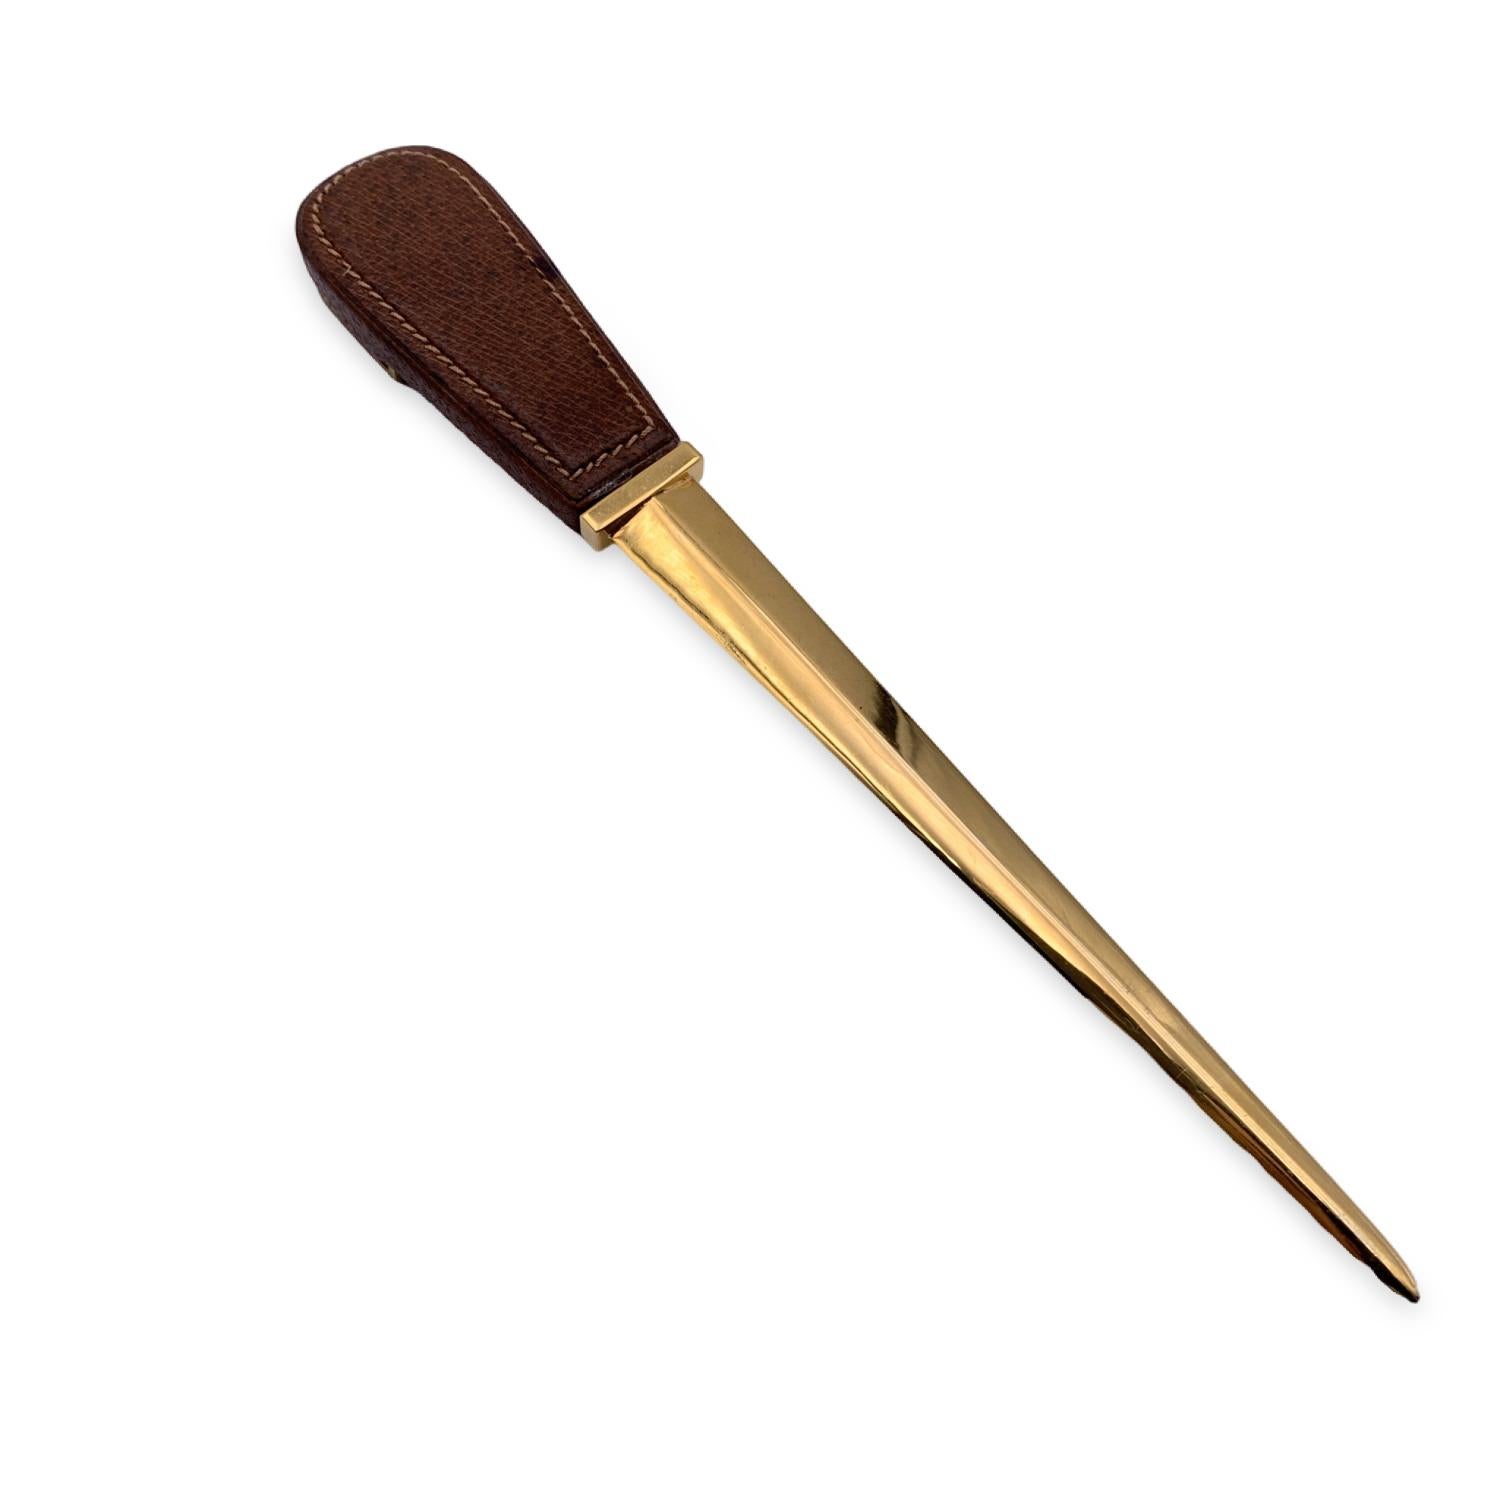 Vintage Gucci letter opener a gold-tone metal. Brown leather with gold metal hardware and GG logo on handle. Total lenght: 10.5 inches - 26.6 cm. 'Gucci taly' engraved at the base of the blade

Details

MATERIAL: Metal

COLOR: Gold

MODEL: